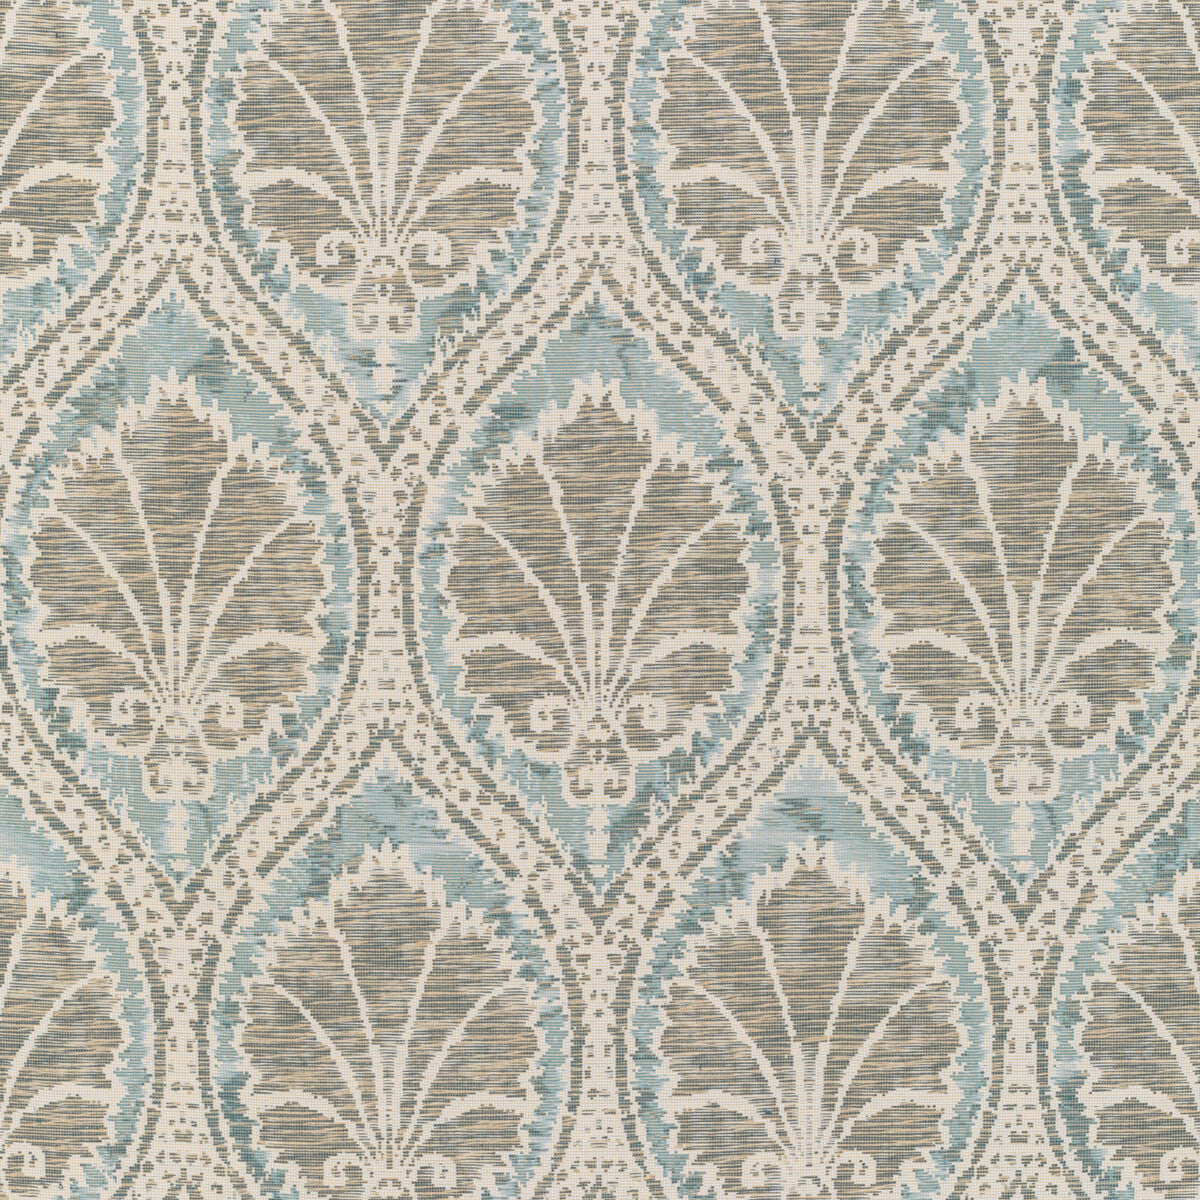 Seville Weave fabric in sky/aqua color - pattern 2021108.115.0 - by Lee Jofa in the Triana Weaves collection